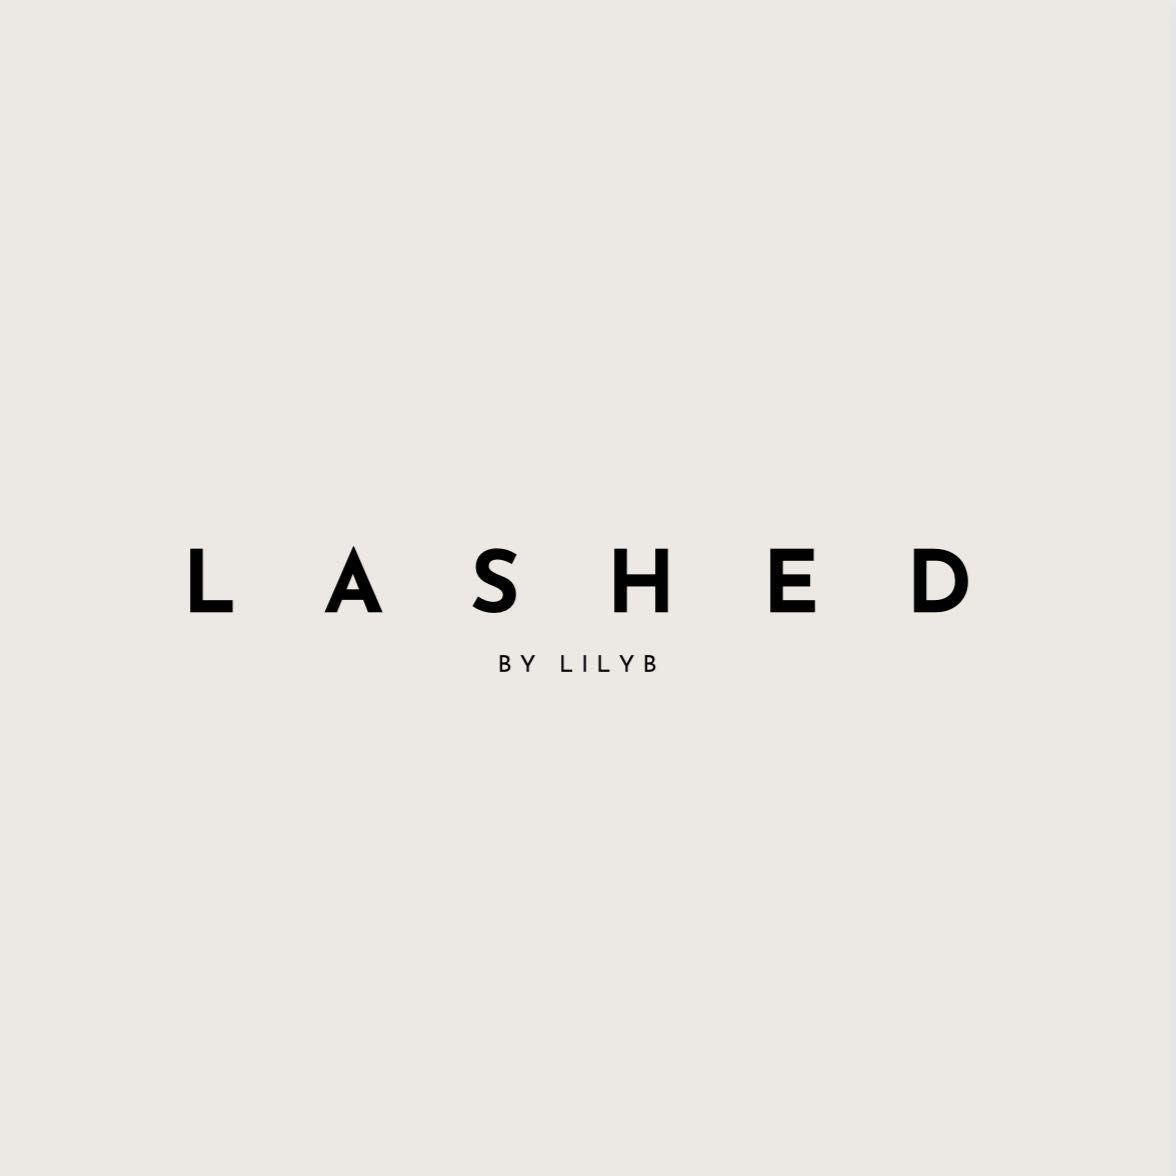 LASHED BYLILYB, 9-11 king street, HD6 1NX, Brighouse